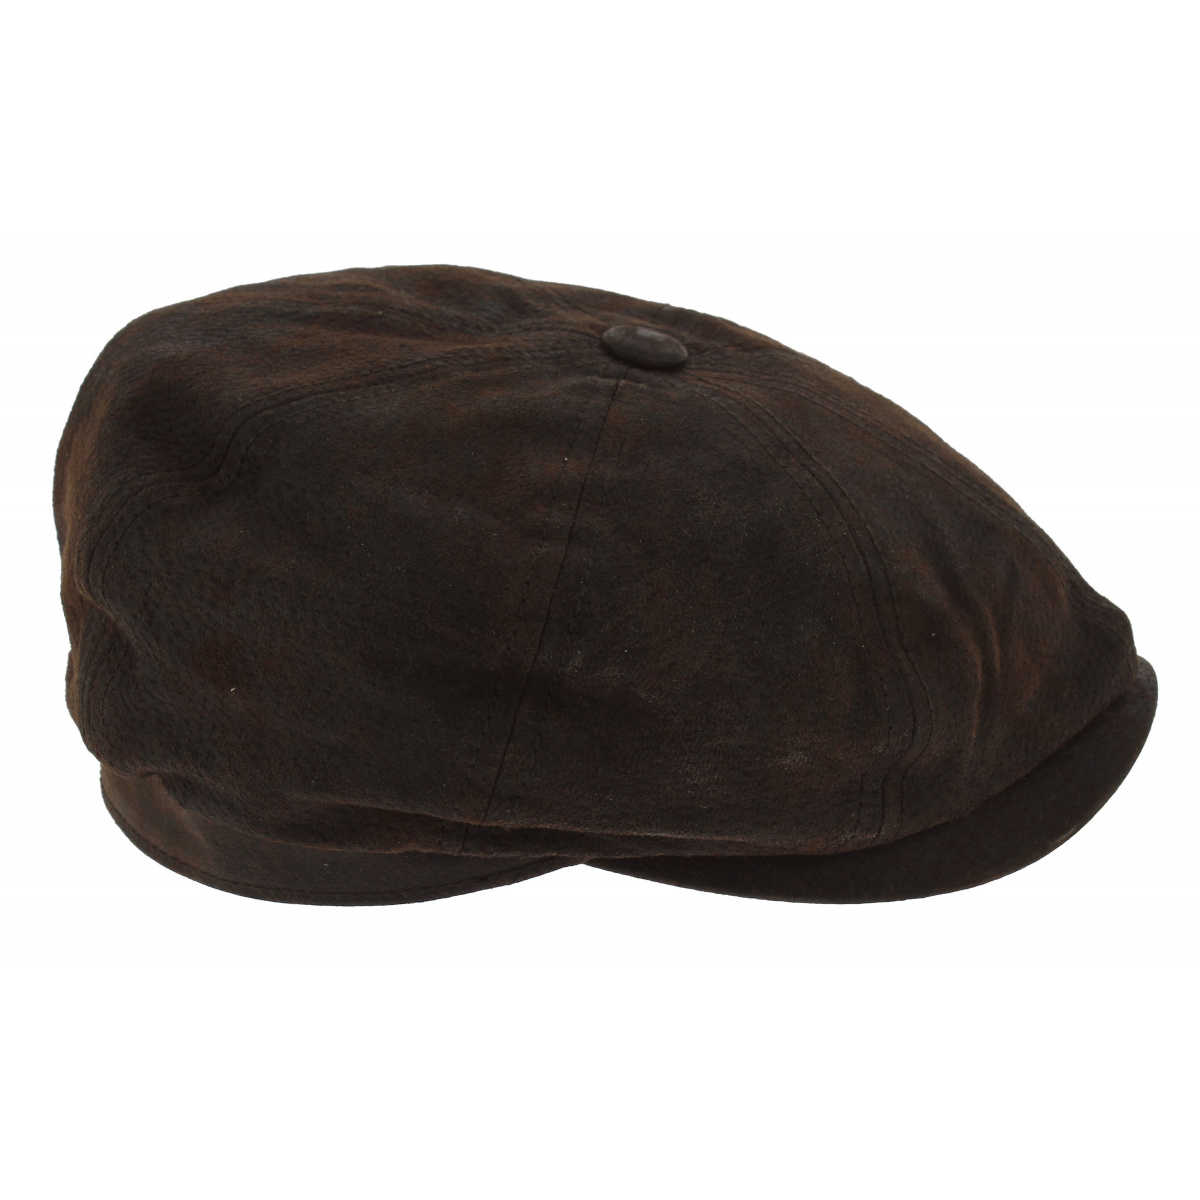 Casquette hatteras Burney cuir - Stetson Reference : 131